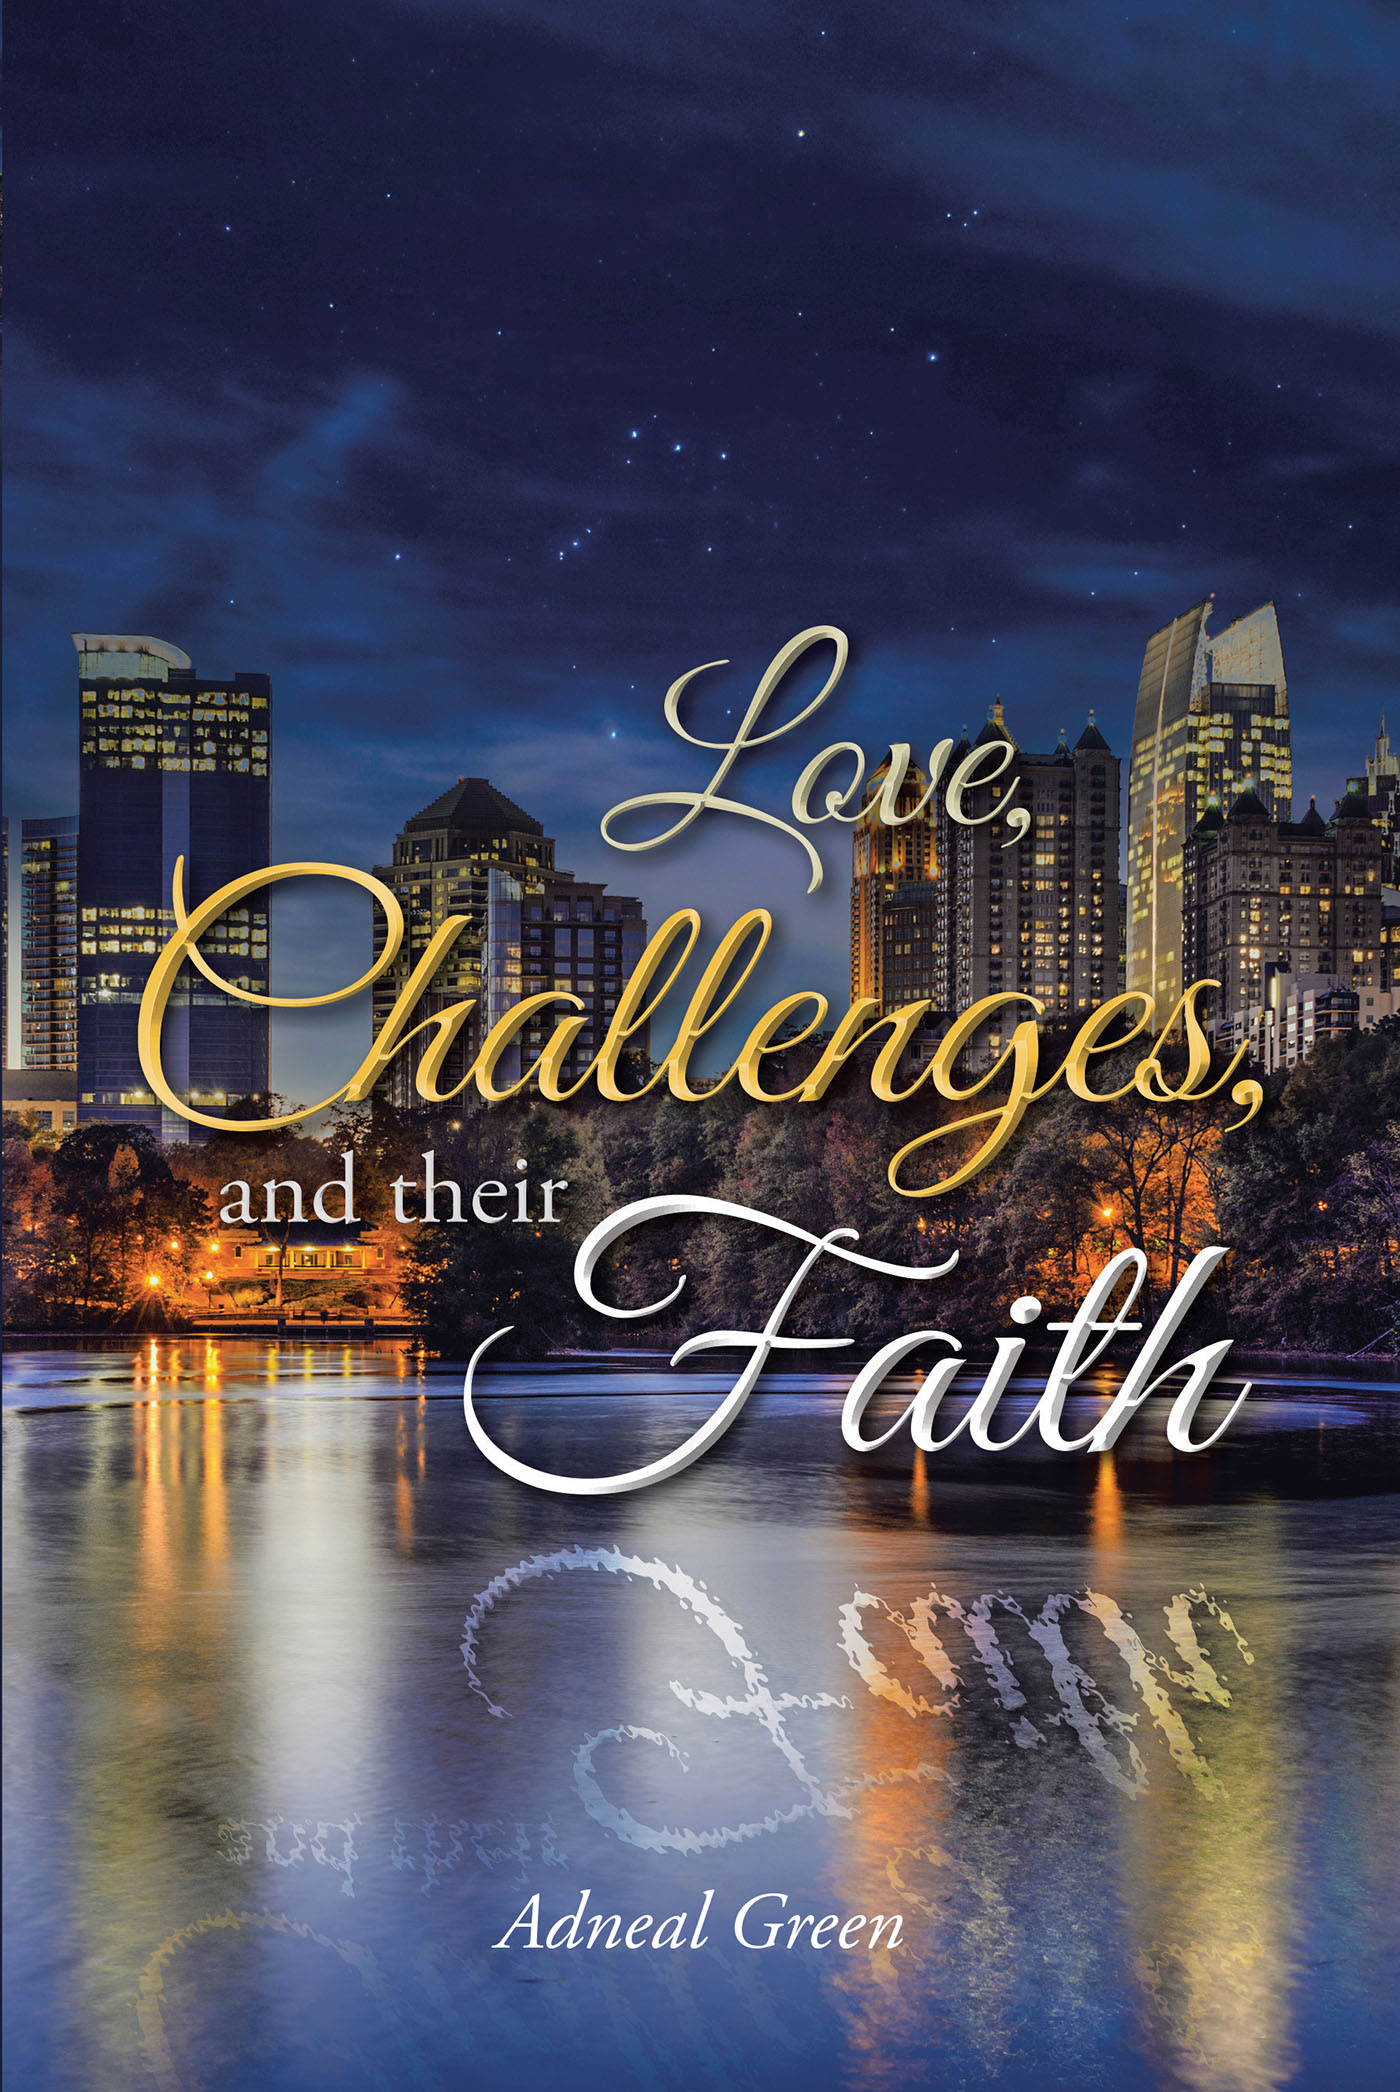 Adneal Green’s Newly Released "Love, Challenges, and their Faith" is an Enjoyable Fiction That Brings a Family’s Highs and Lows to Life